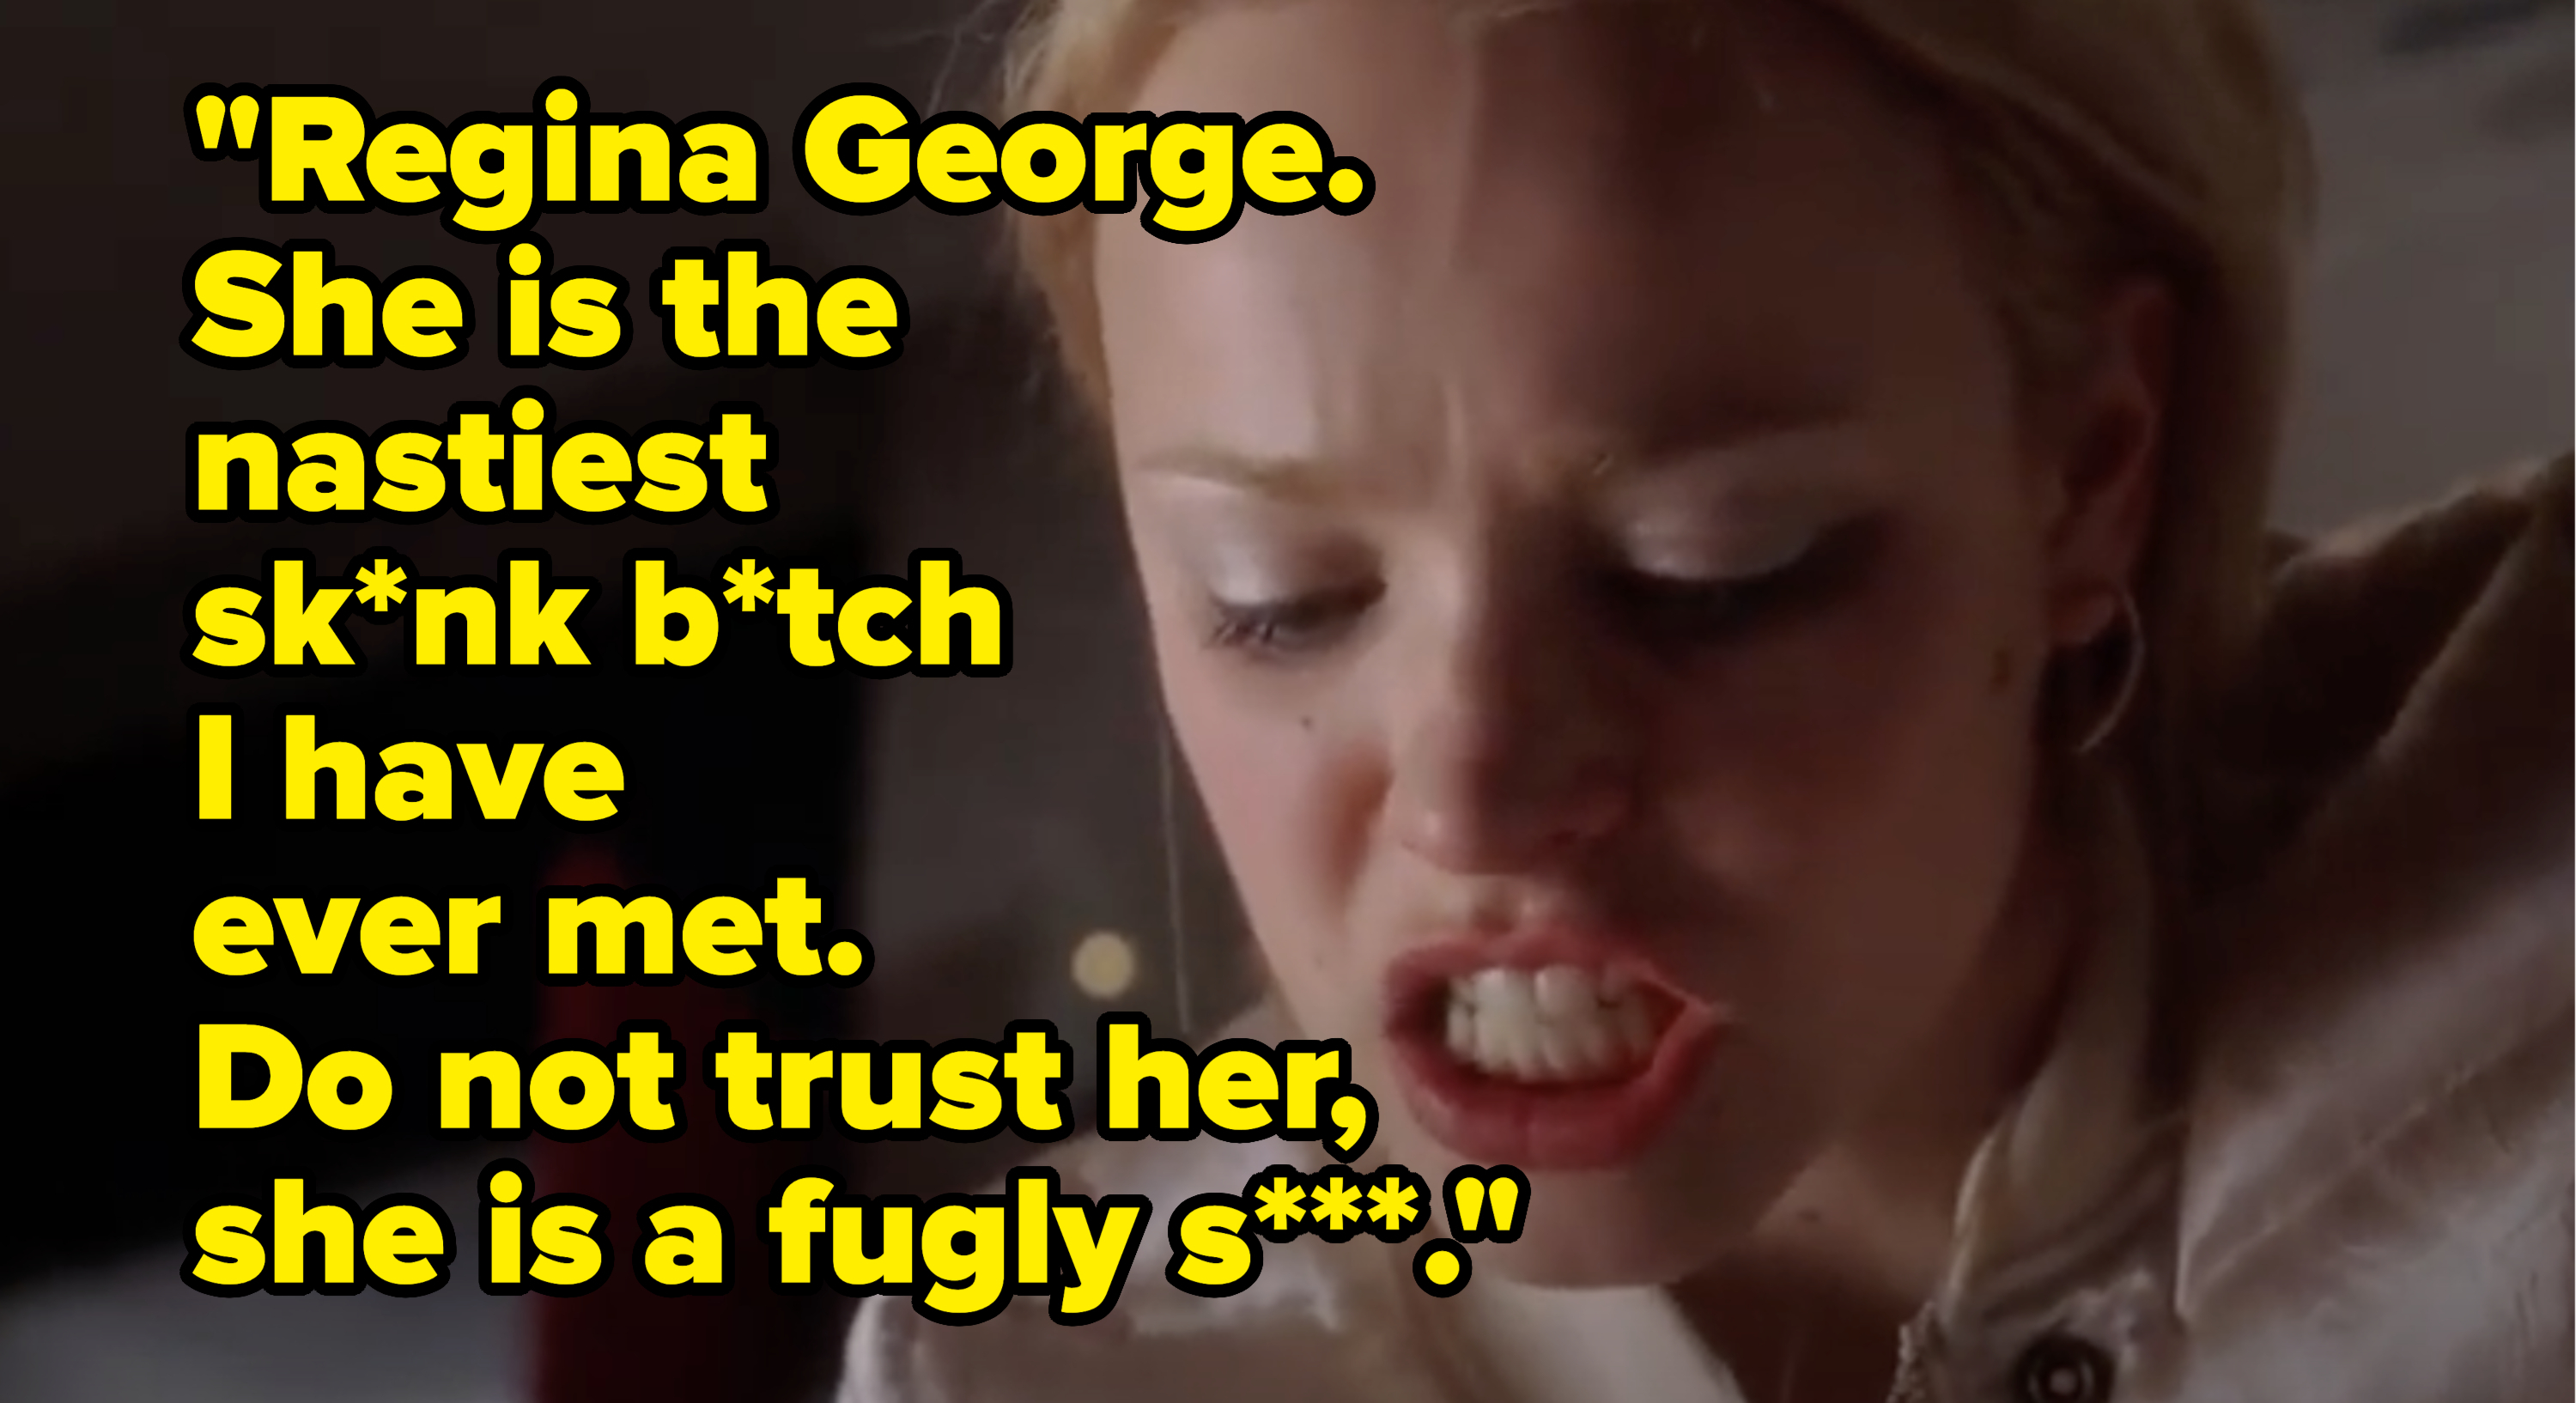 Regina George angrily looks down. A vein pops out of her head and her teeth are clenched. Text on the left reads: &quot;Regina George. She is the nastiest sk*nk b*tch I have ever met. Do not trust her, she is a fugly sl*t.&quot;